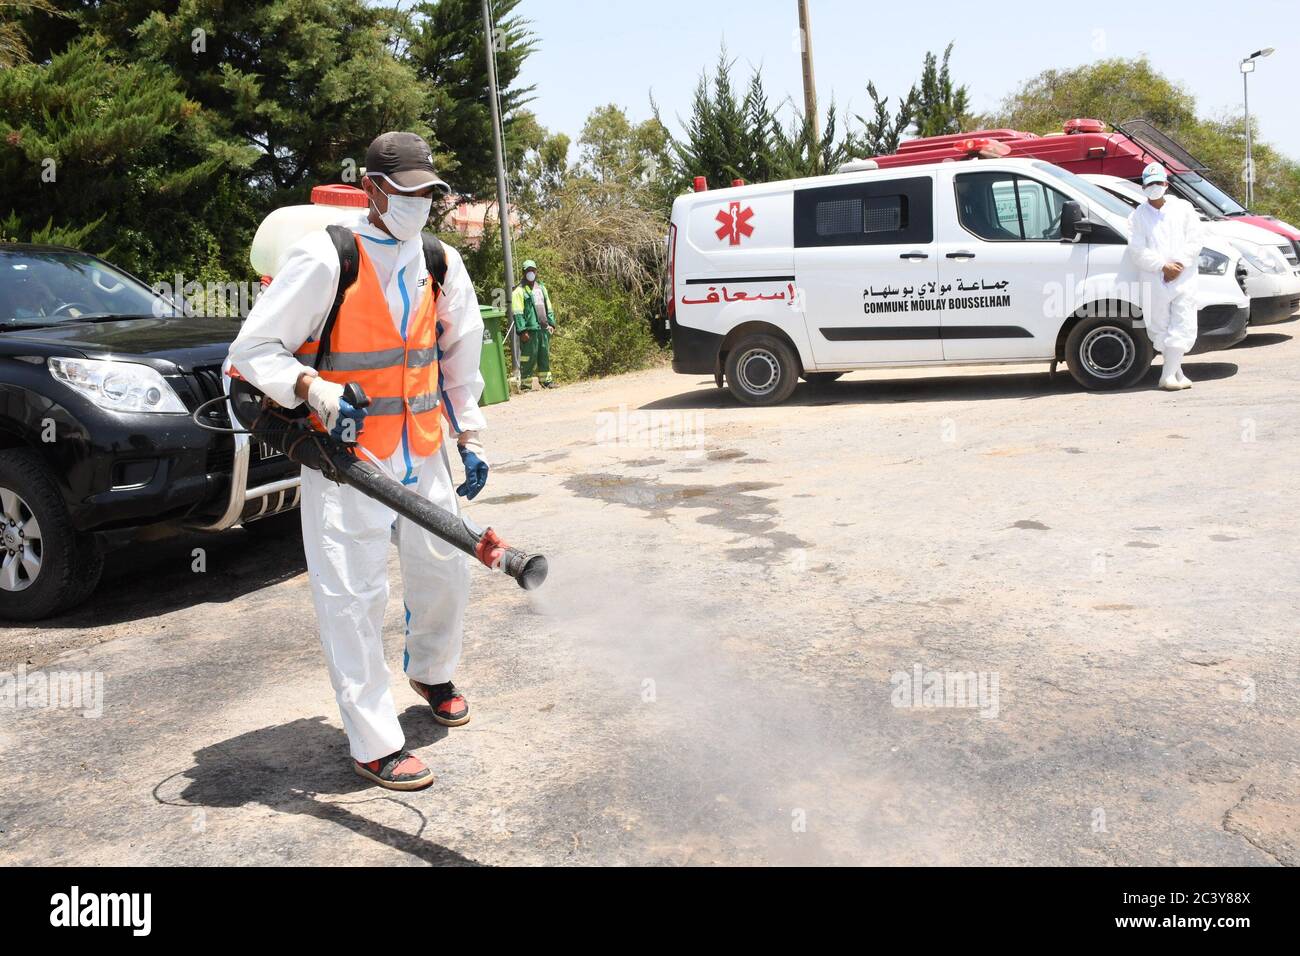 Moulay Bousselham, Morocco. 22nd June, 2020. A medical worker disinfects a parking lot in Moulay Bousselham, Morocco, on June 22, 2020. A total of 195 new COVID-19 cases were confirmed in Morocco on Monday, bringing the total number of coronavirus cases in the country to 10,172. Credit: Chadi/Xinhua/Alamy Live News Stock Photo